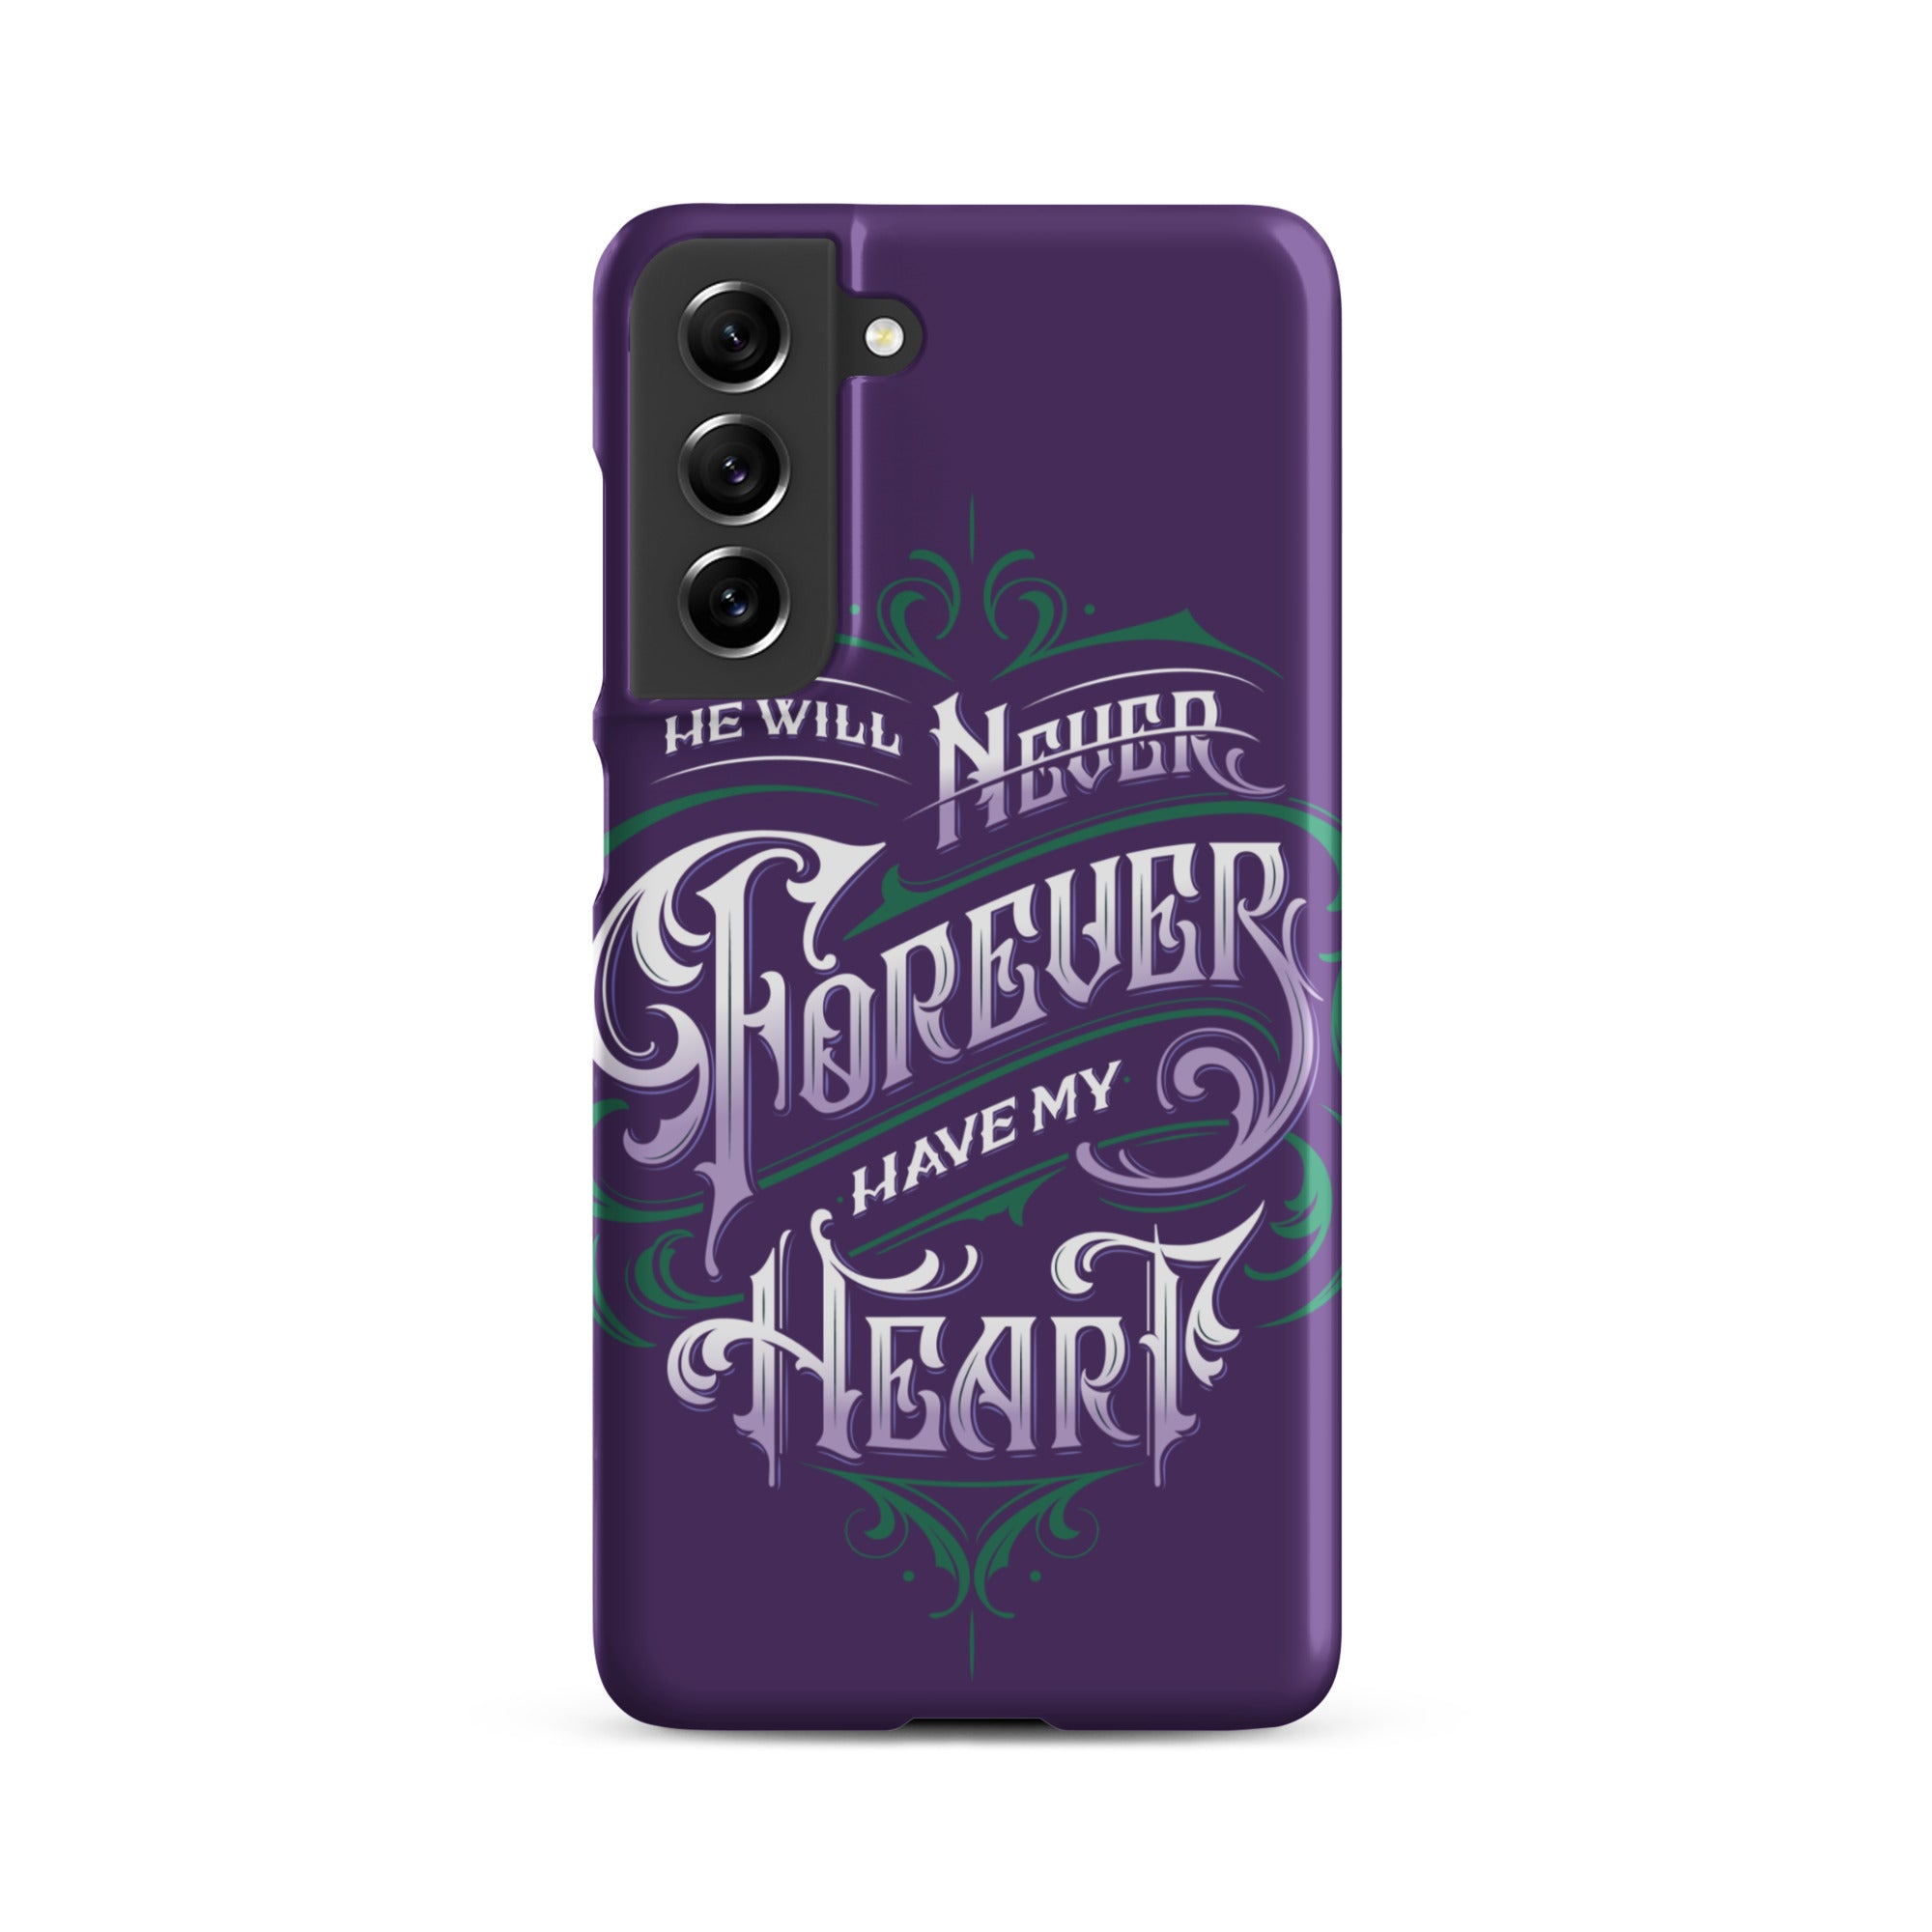 "He will never have my heart" Samsung Phone Case